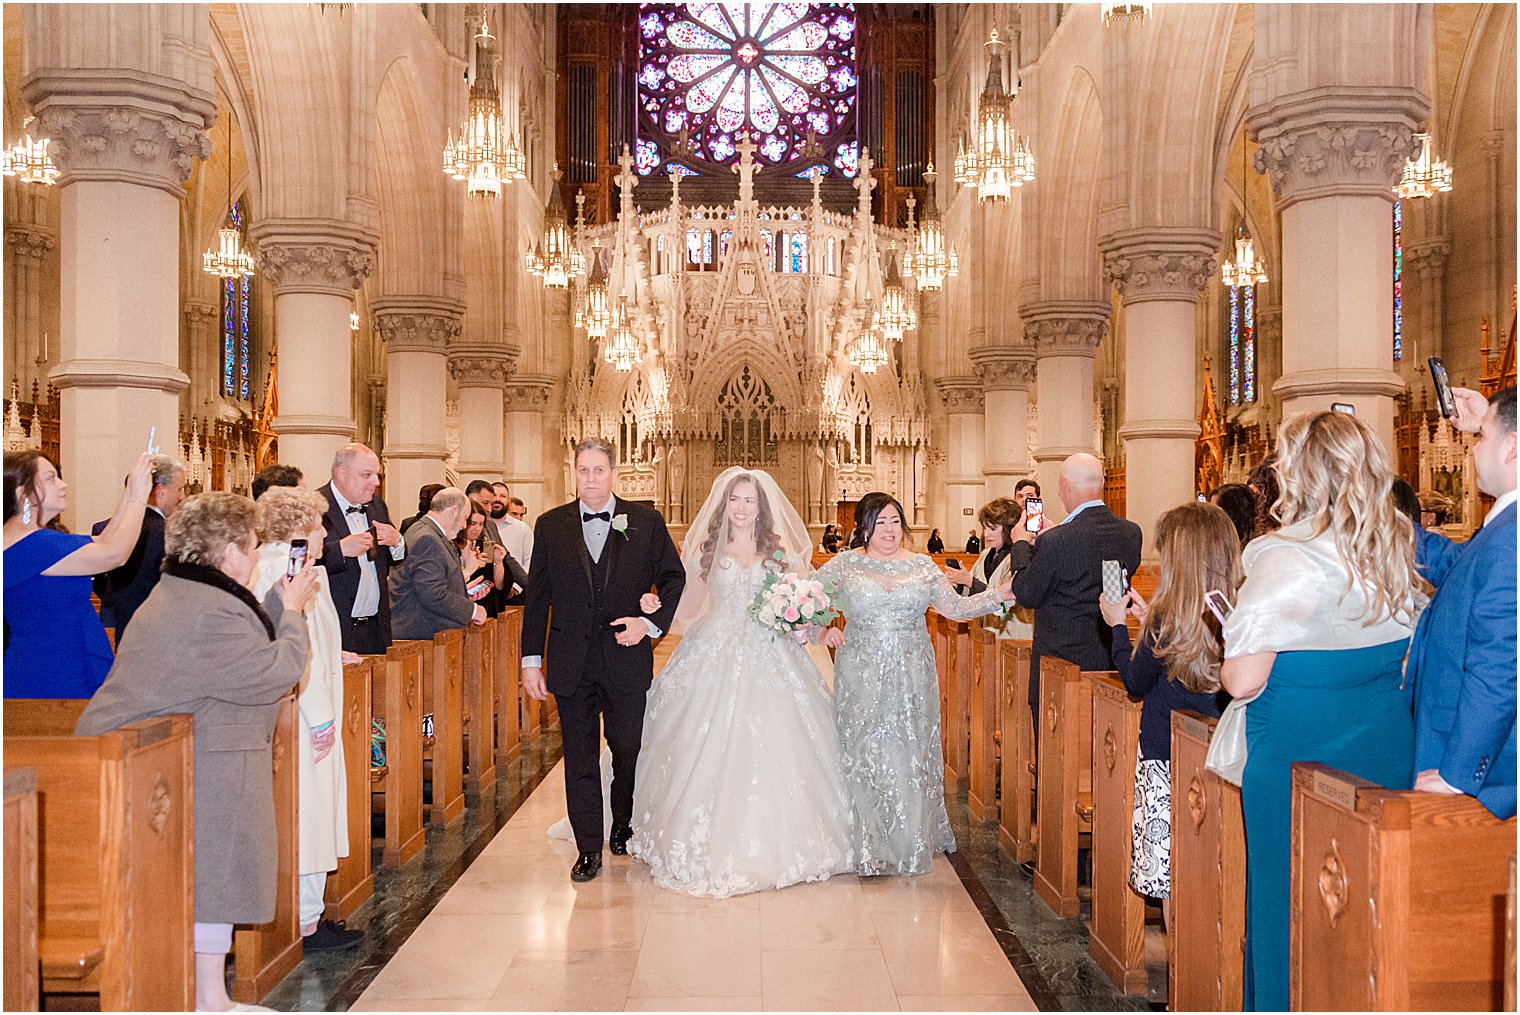 parents walk bride down aisle during Catholic wedding ceremony at Cathedral Basilica of the Sacred Heart